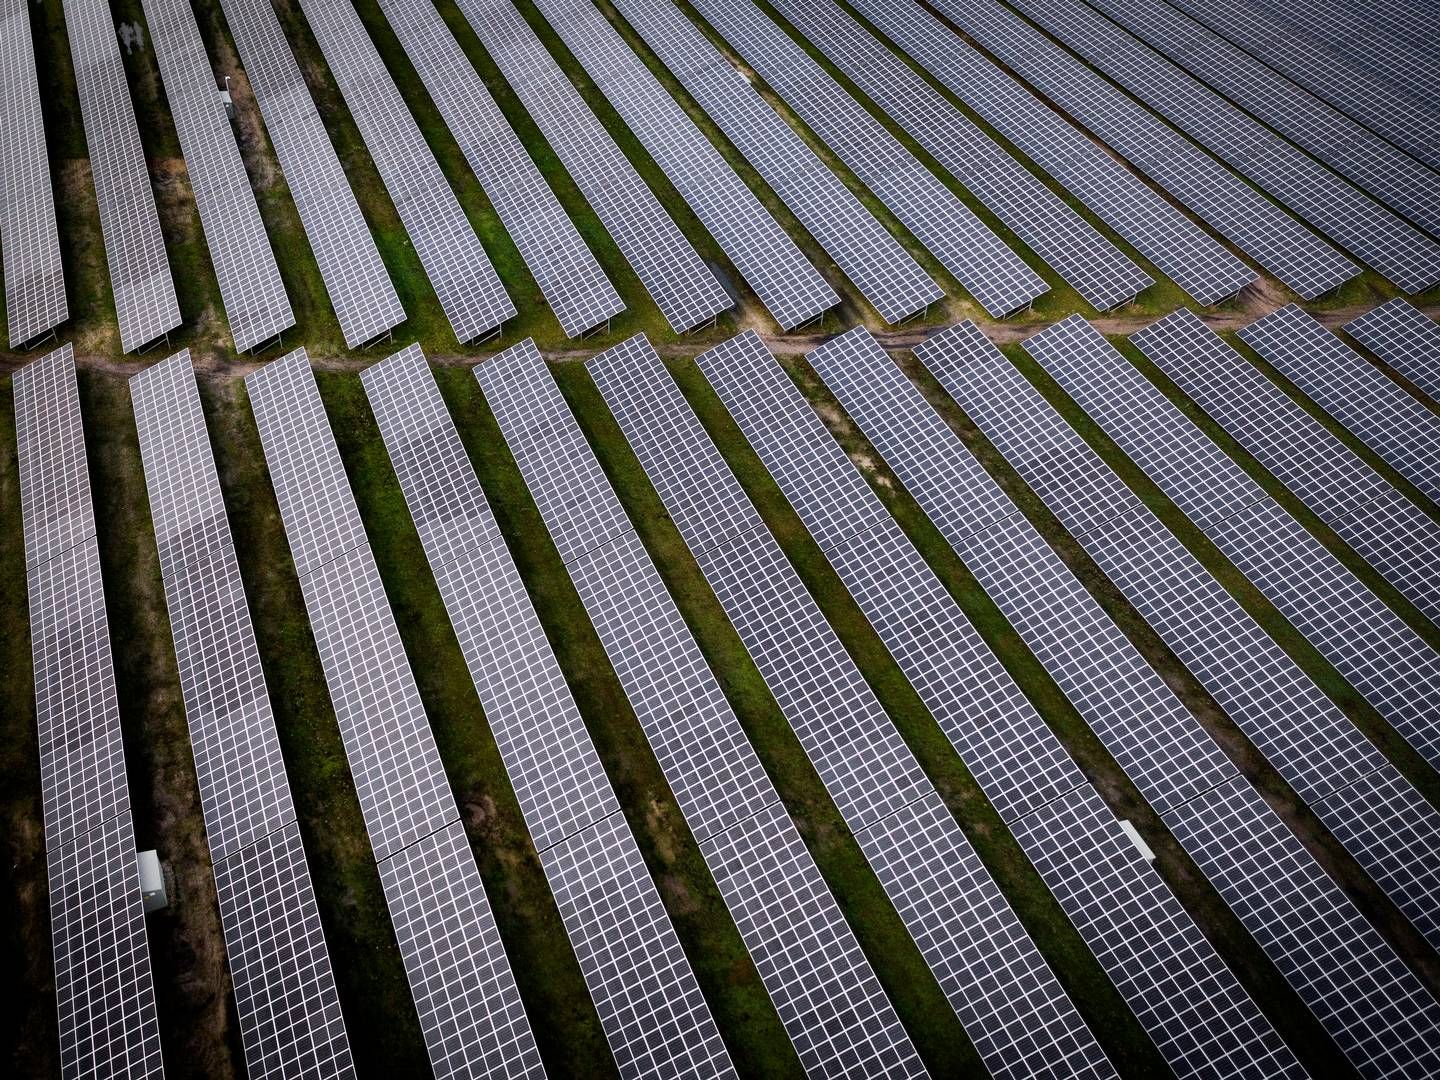 Solar panels will play a large role in the US' clean energy mix. | Foto: Casper Dalhoff